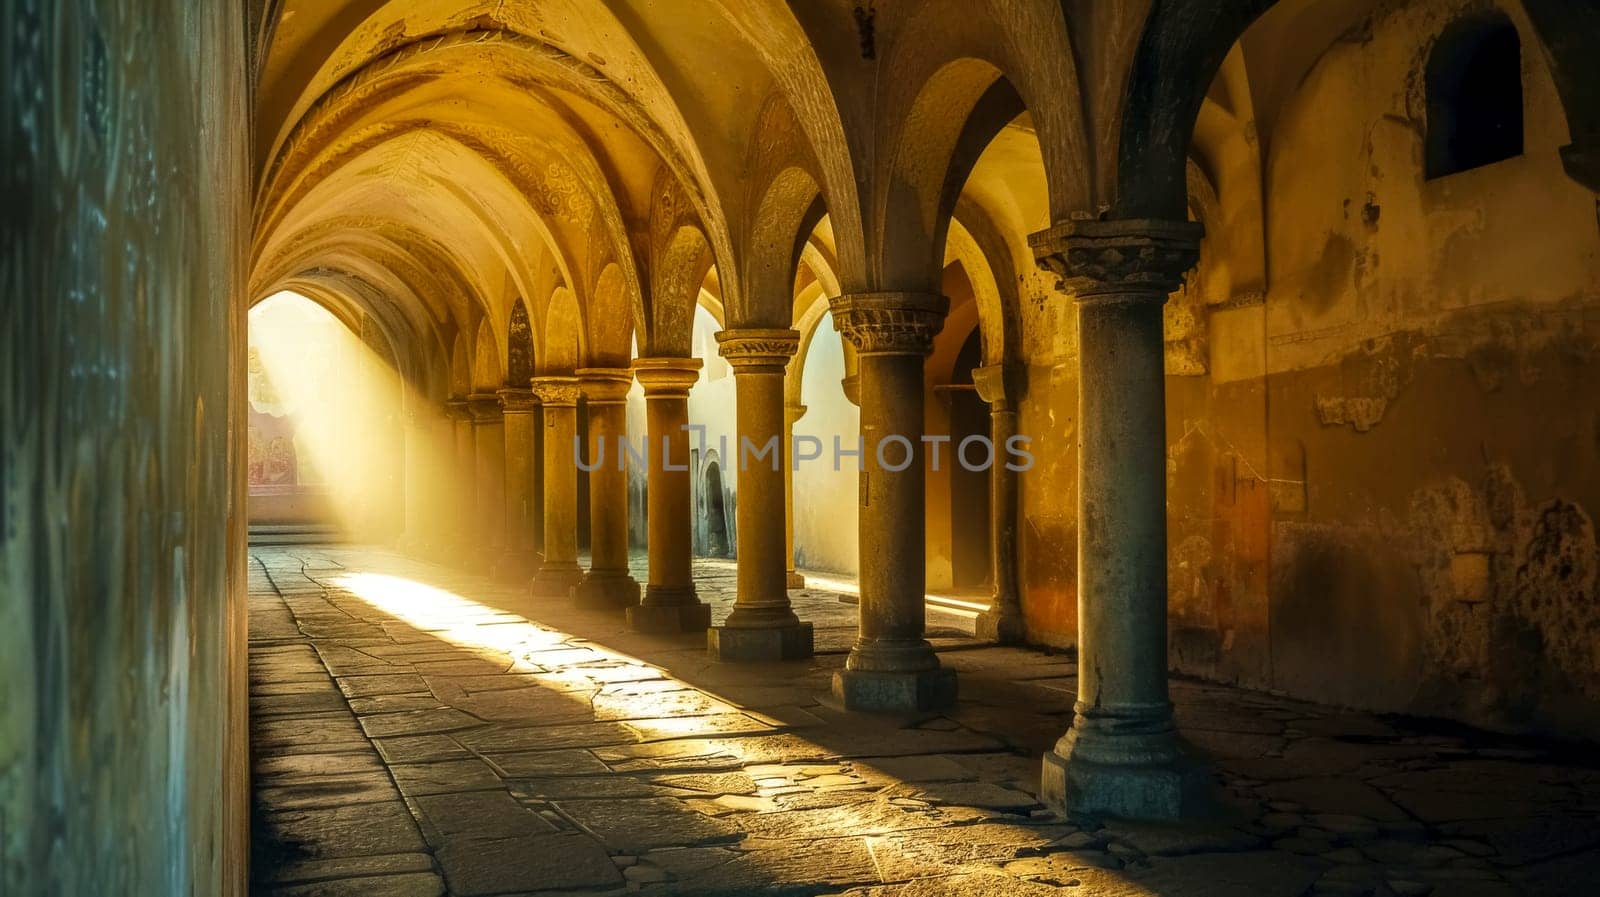 Warm sunlight bathes an old cloister's arched passageway, creating a serene and mystical atmosphere